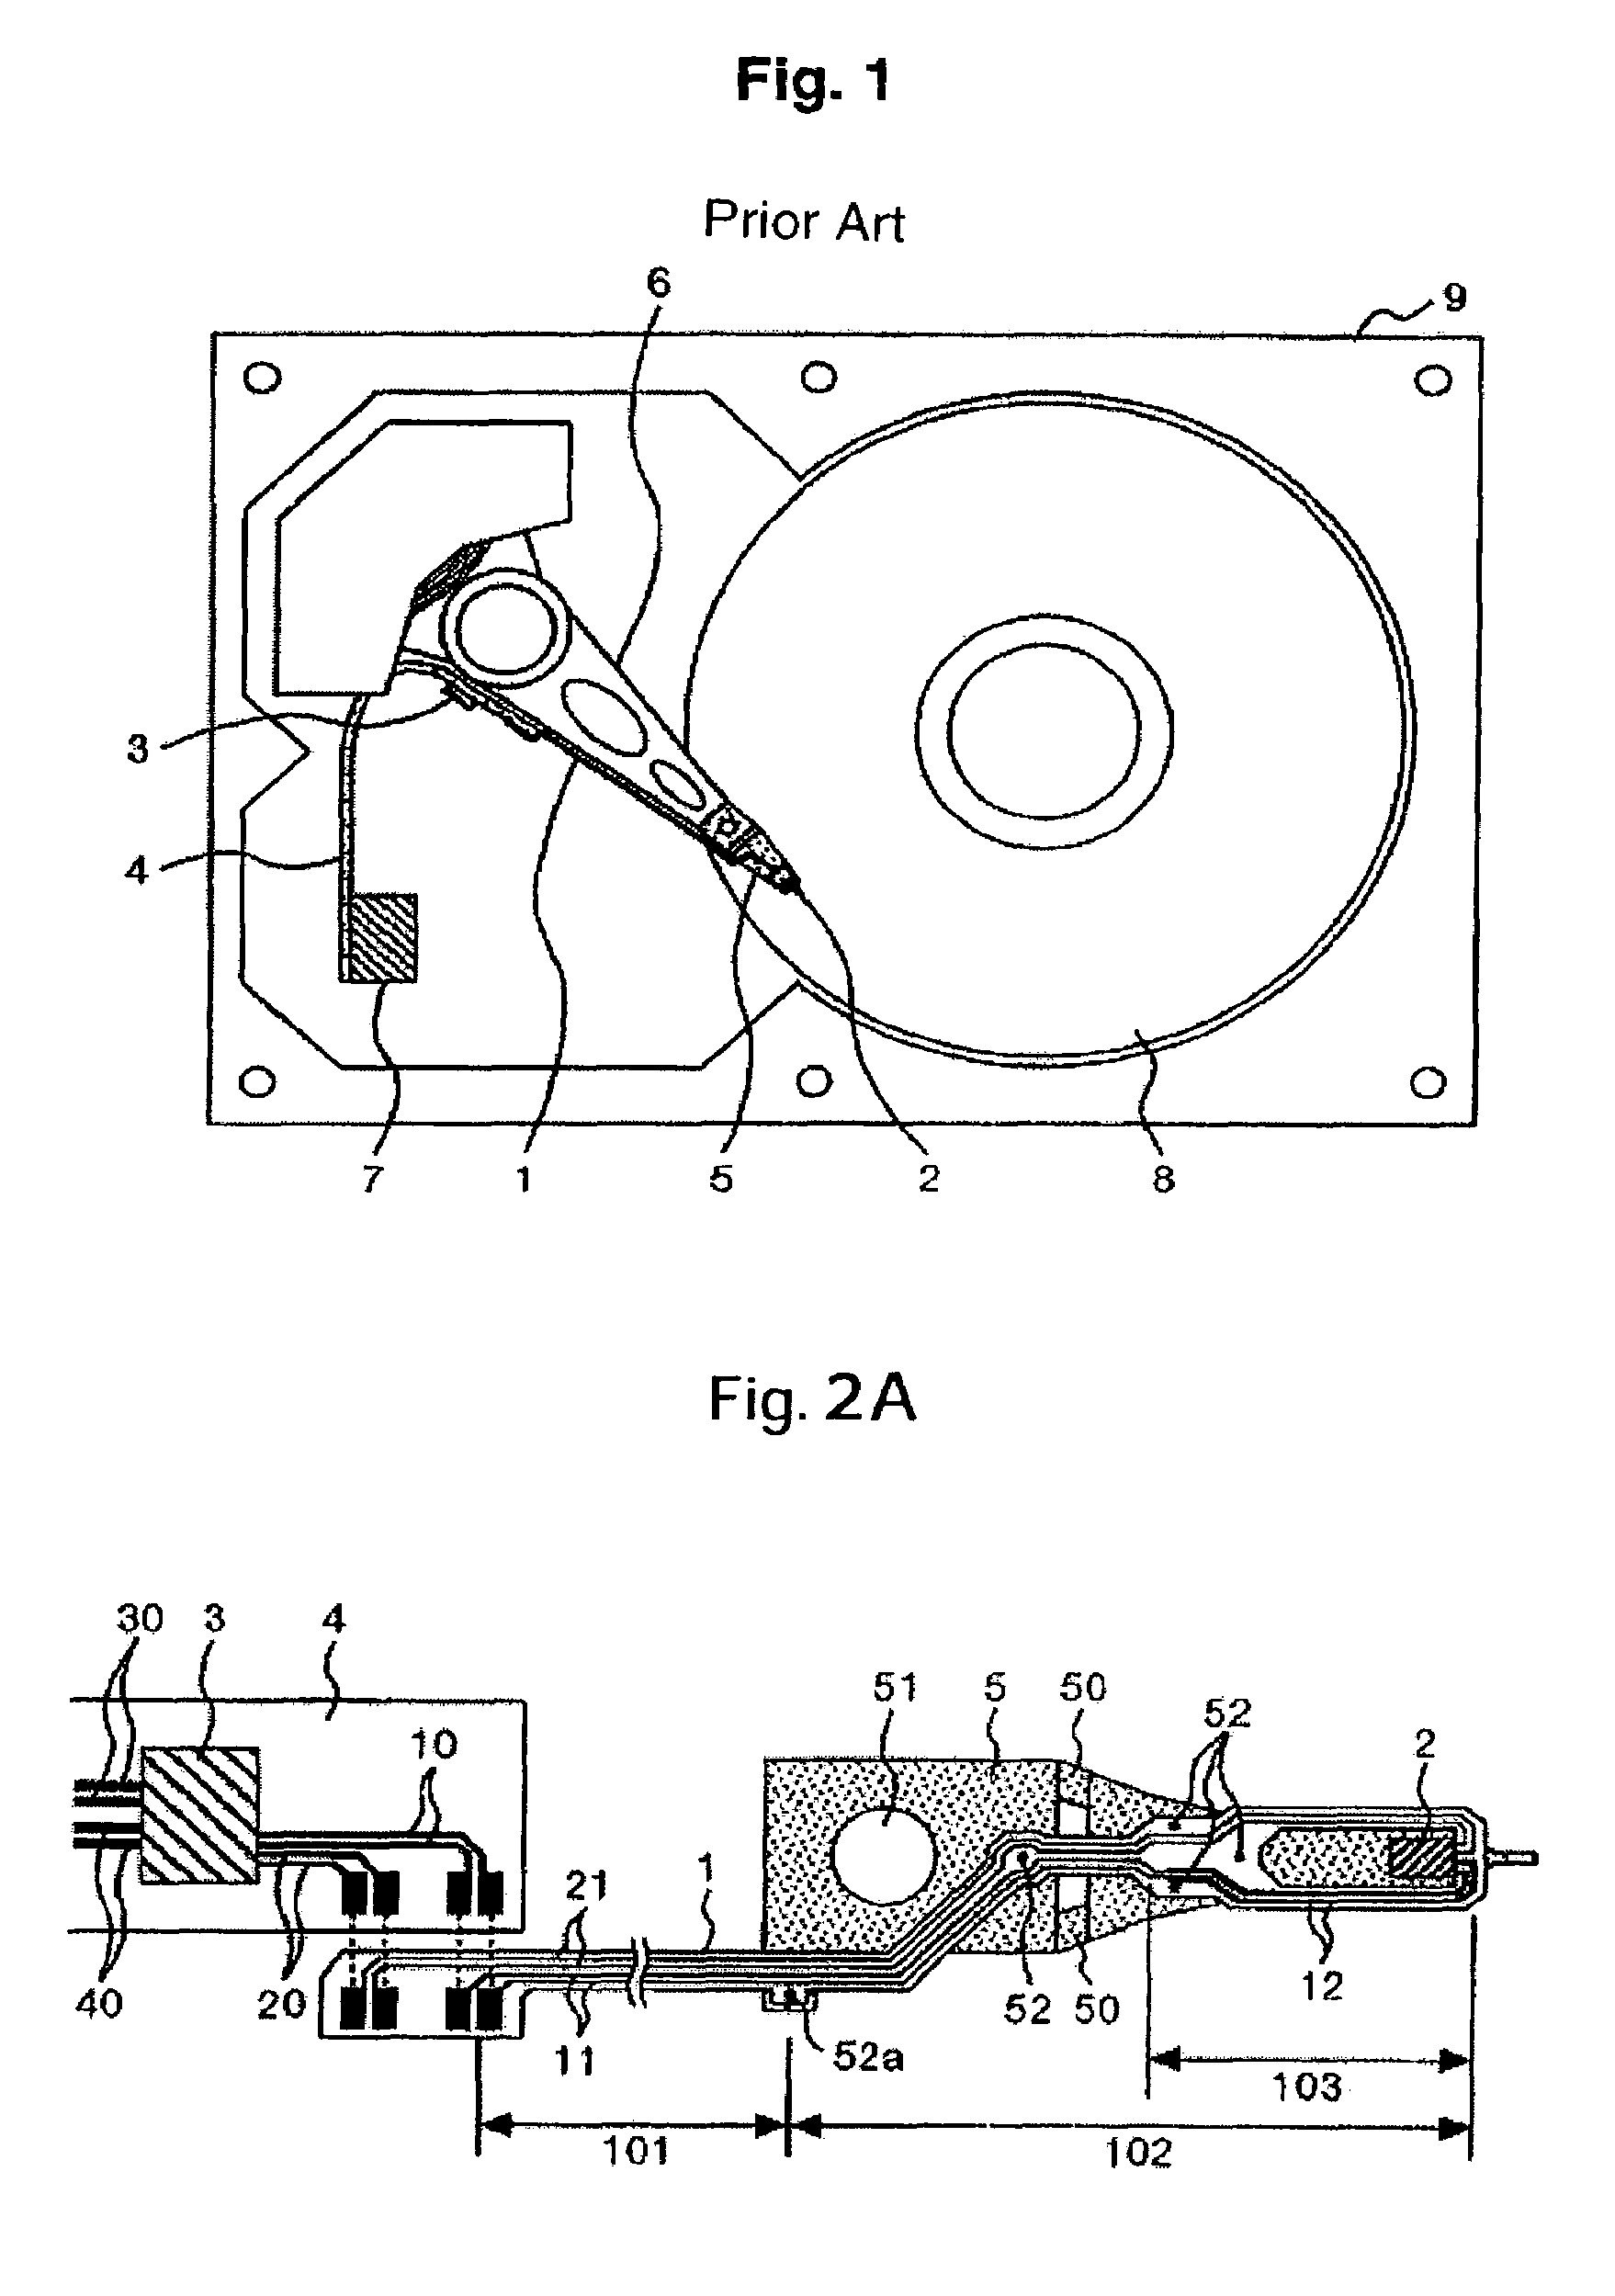 Wiring component and magnetic recording drive for high data-rate recording